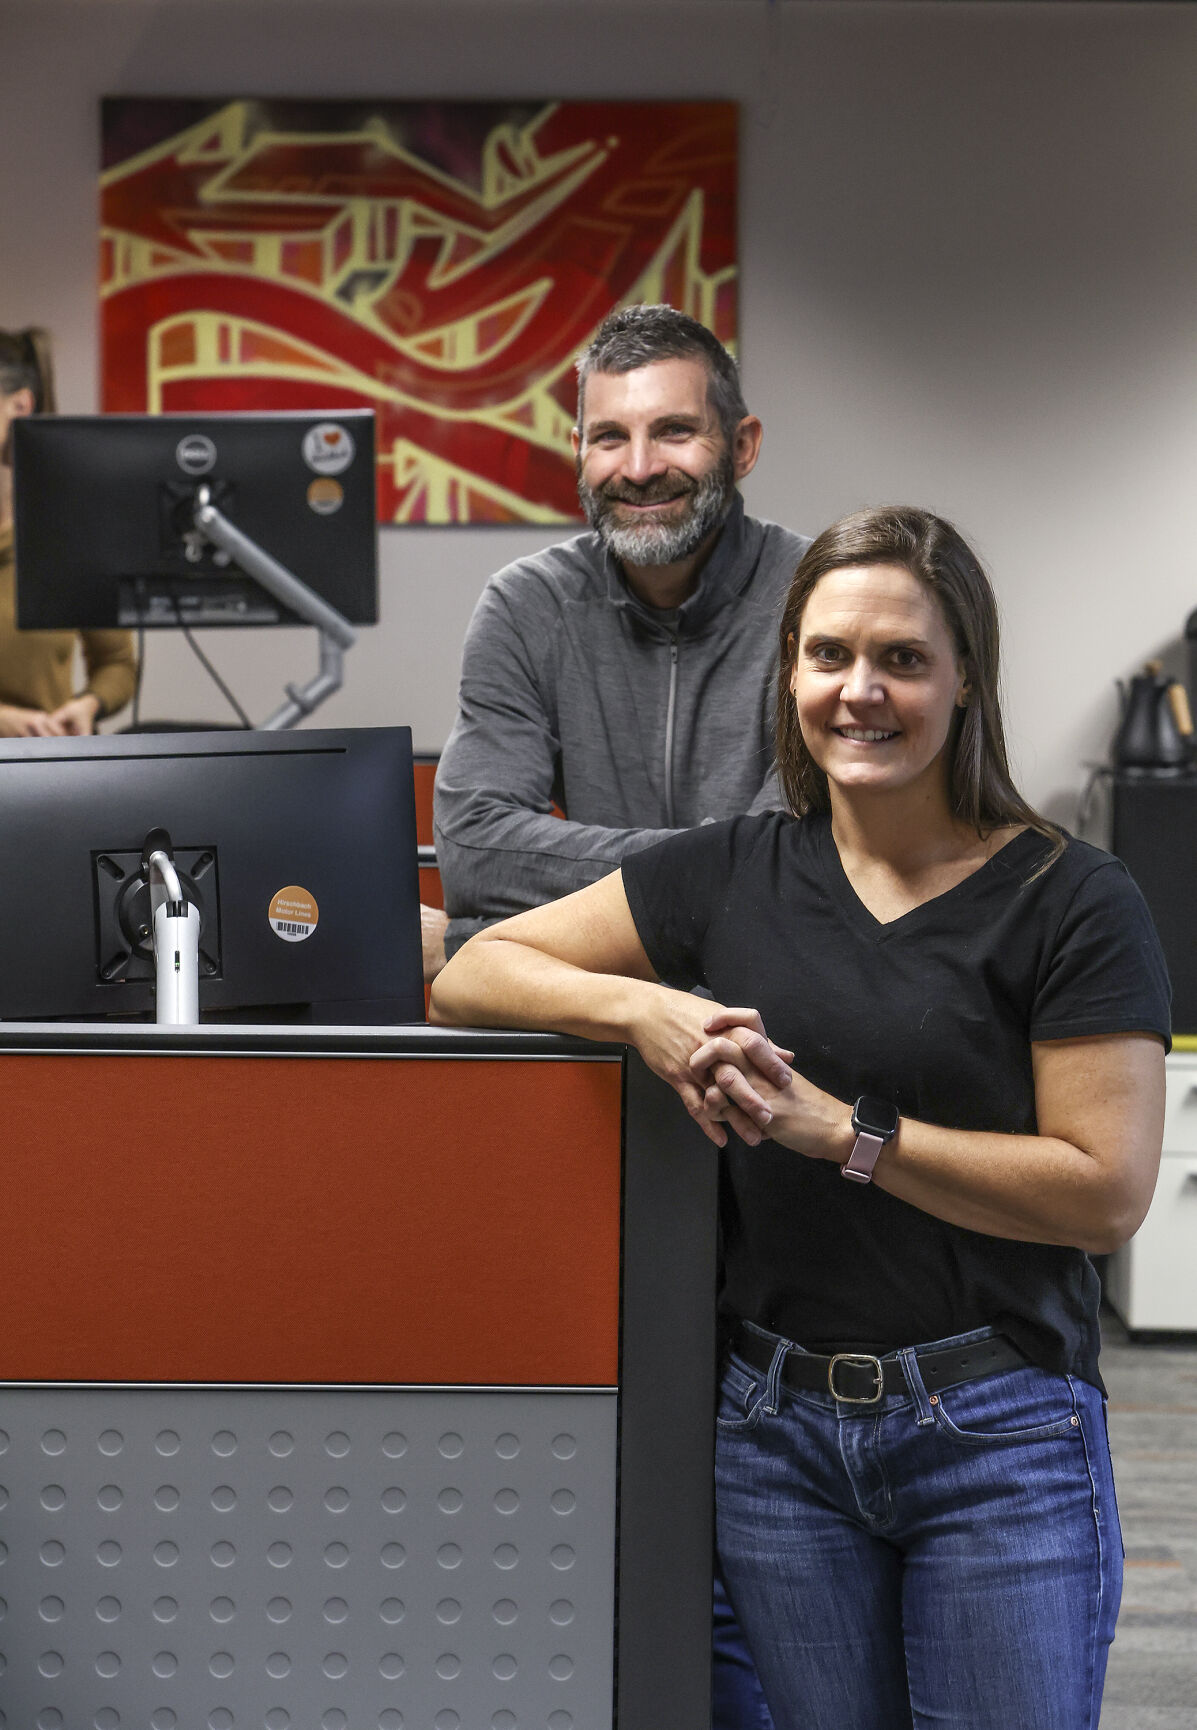 Kristi Marshall and Brad Thies are the health and wellness directors for Hirschbach in Dubuque.    PHOTO CREDIT: Dave Kettering